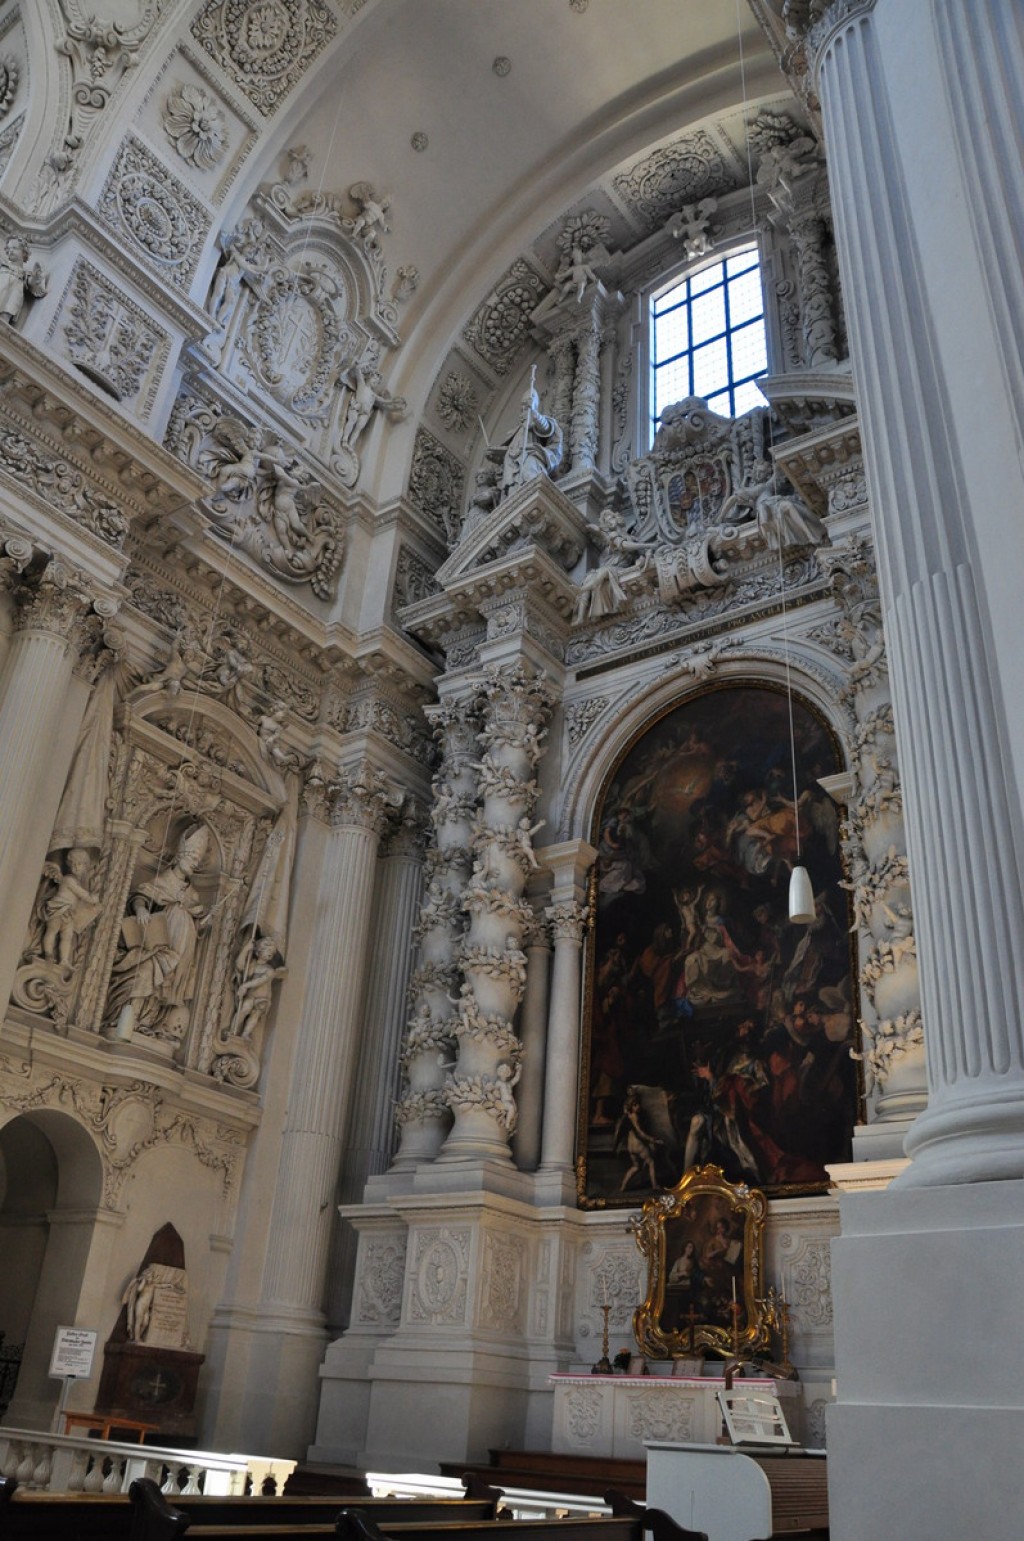 The churches of Munich were some of the most beautiful we've seen.